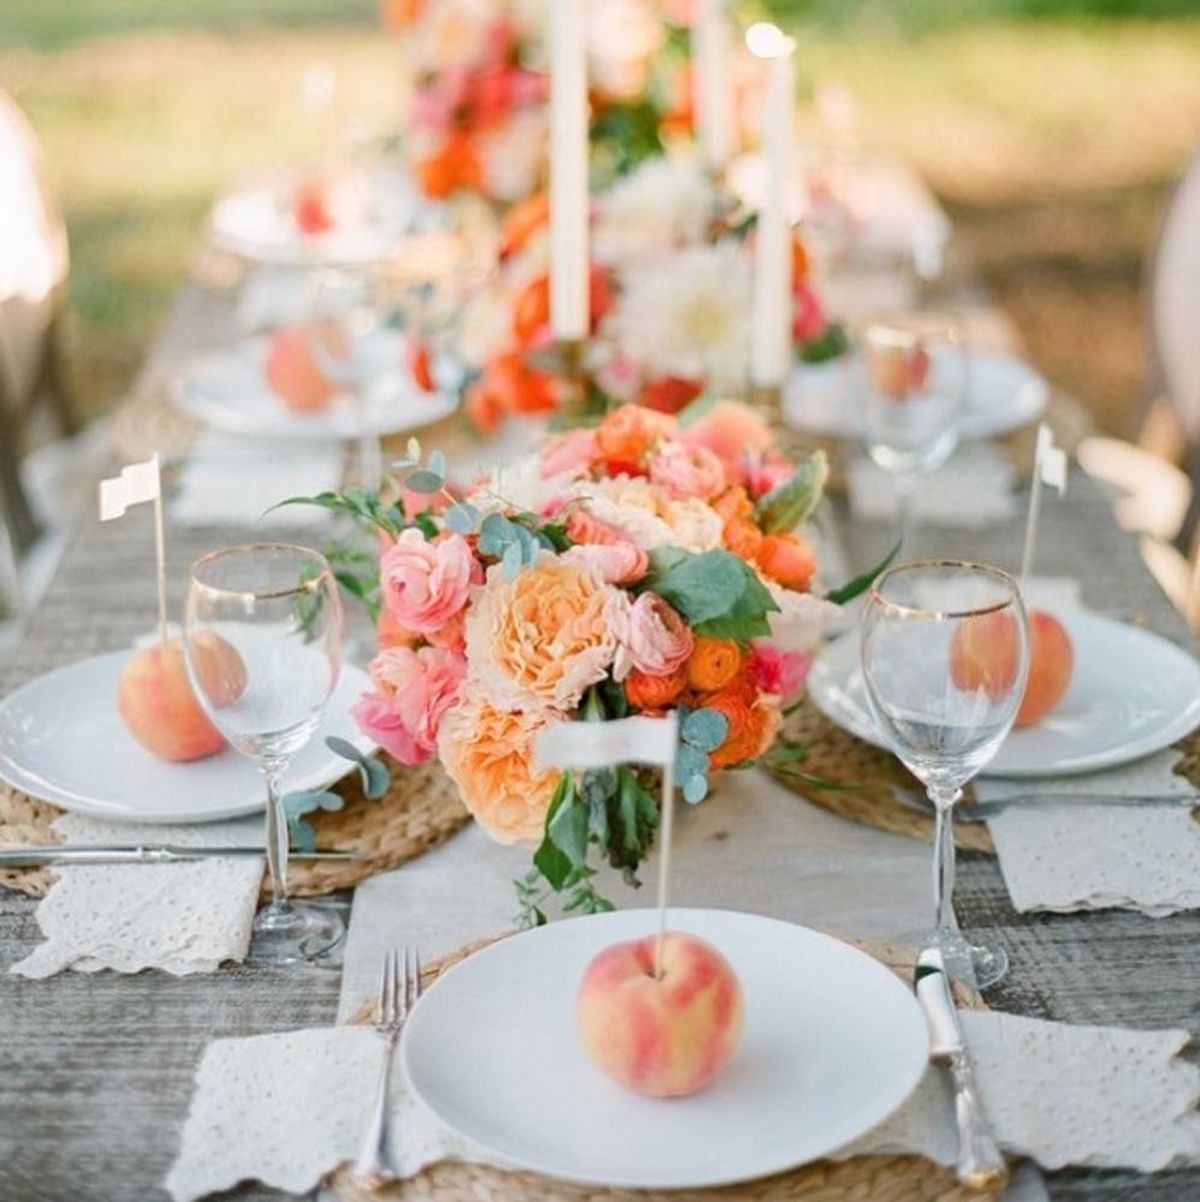 This Simple Decor Trick Will Take Your Summer Party to New Levels